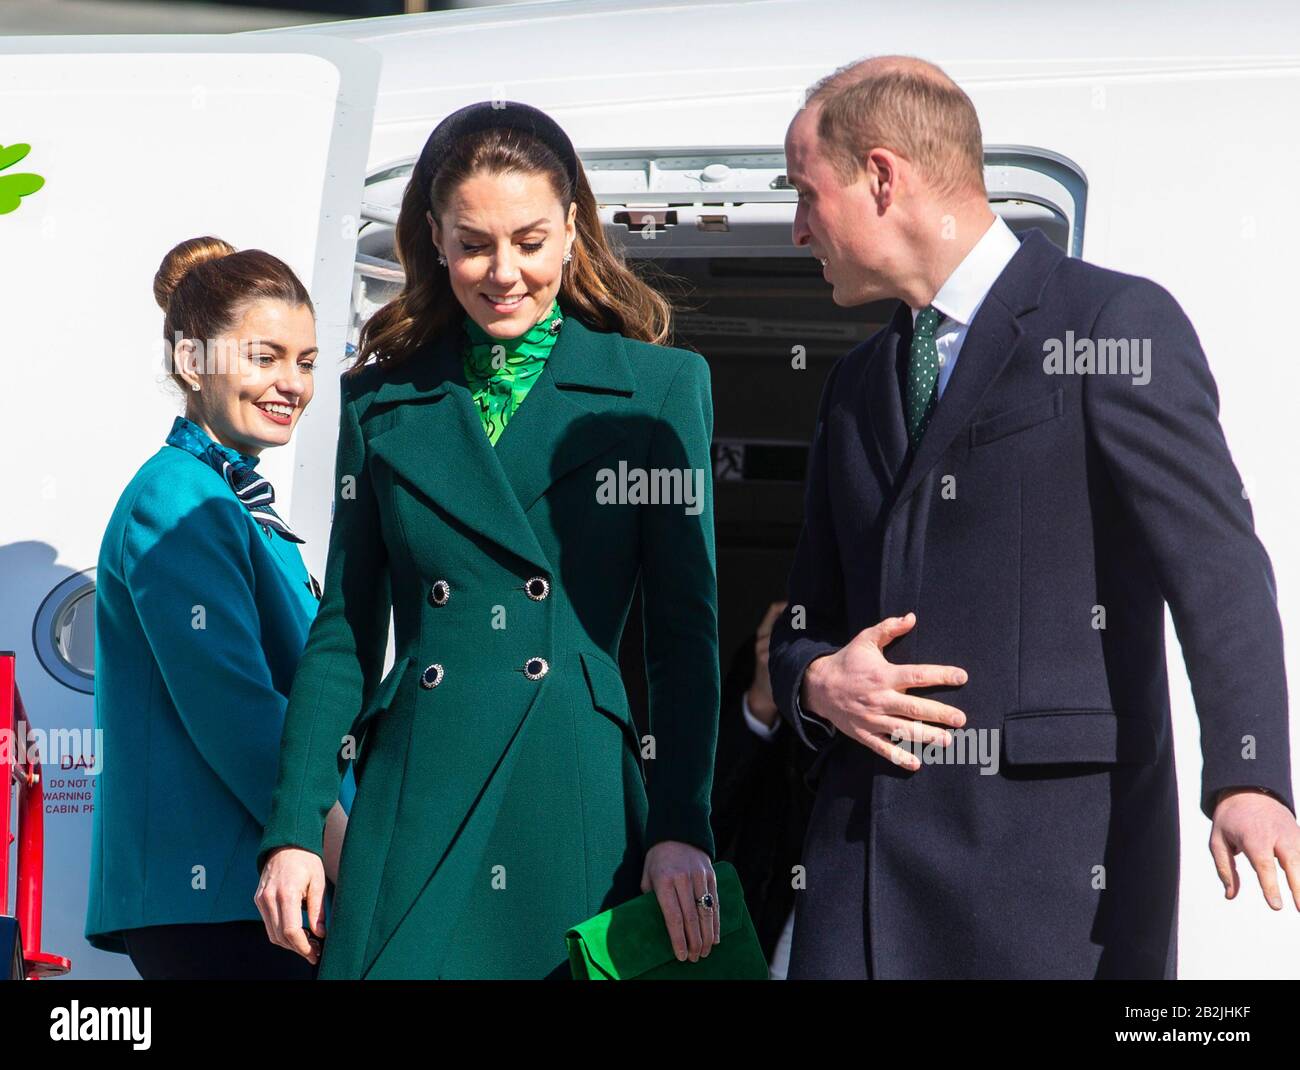 The Duke and Duchess of Cambridge walk down the steps of the plane as they arrive at Dublin International Airport ahead of their three day visit to the Republic of Ireland. Stock Photo